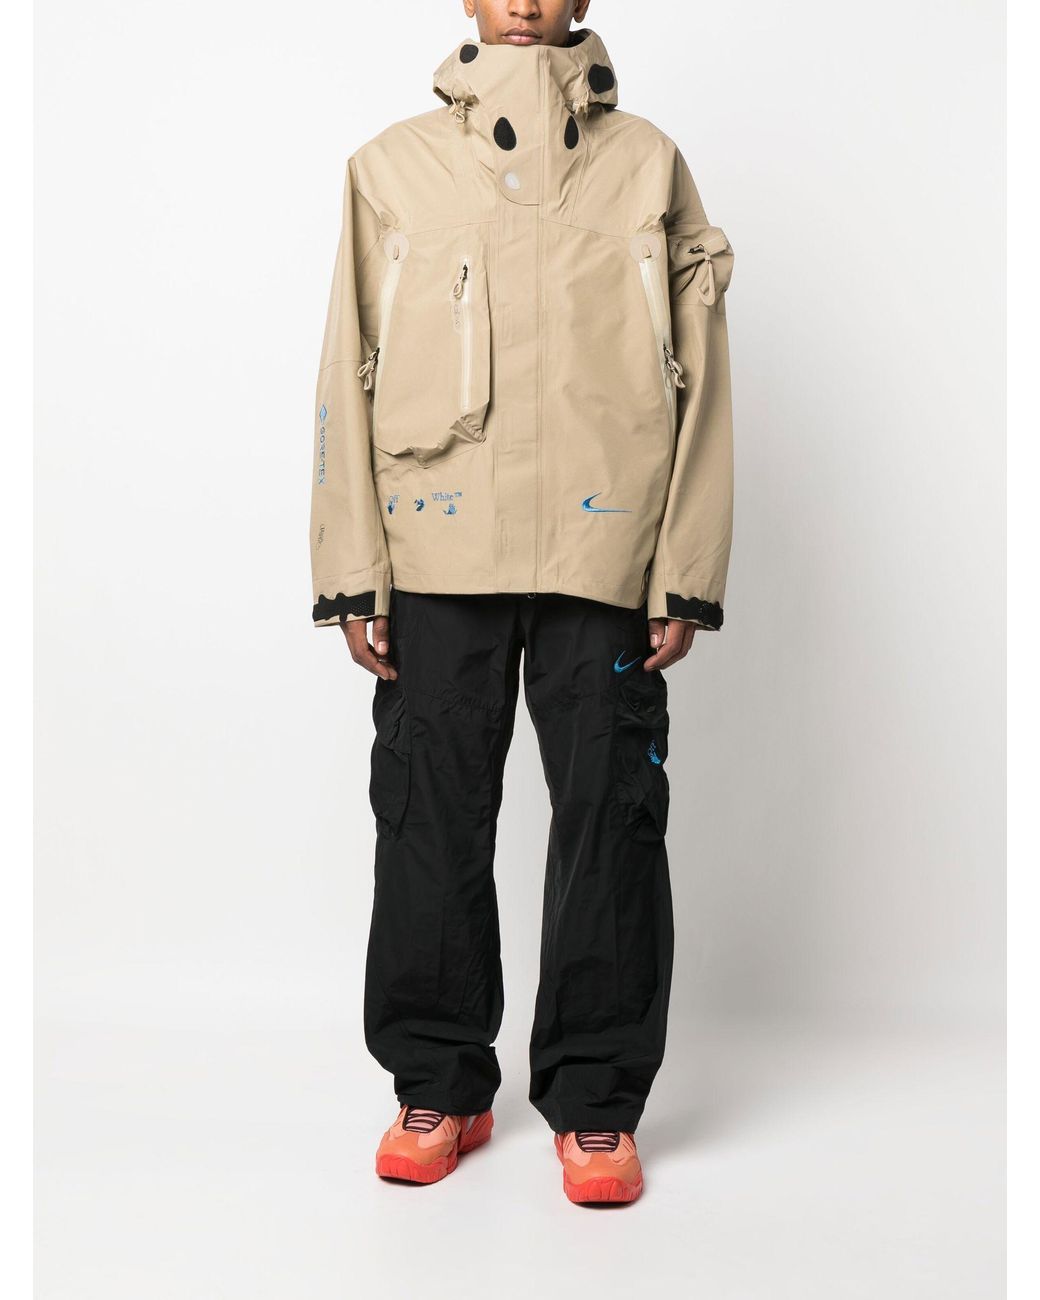 Nike X Off White Hooded Jacket in Natural for Men | Lyst